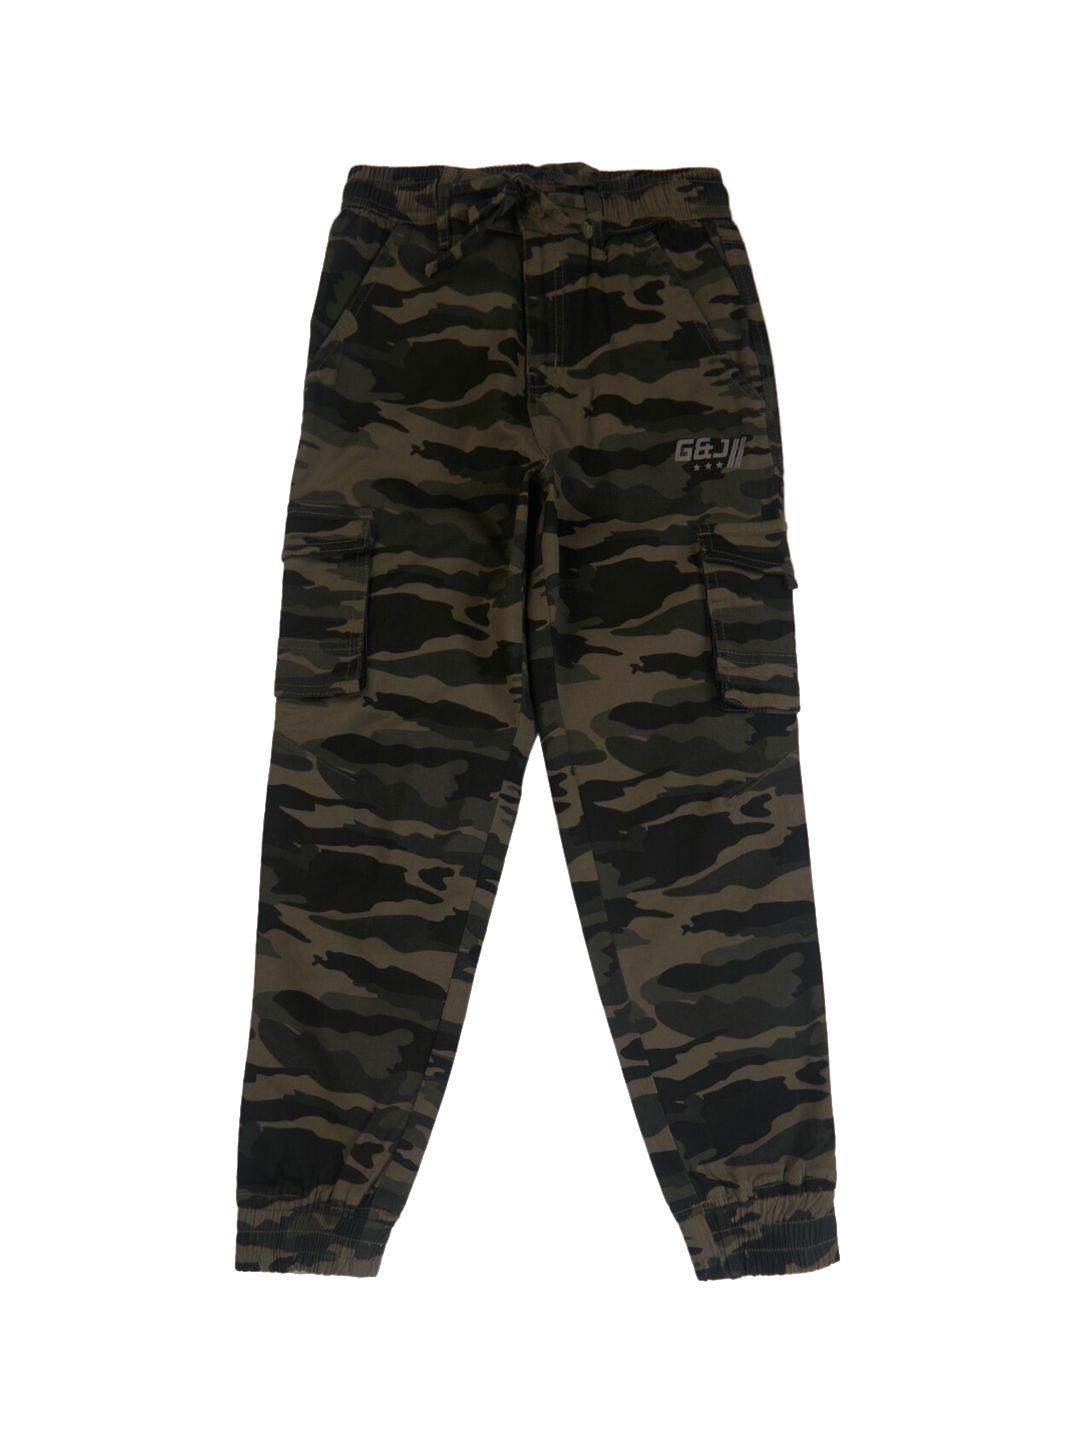 gini and jony boys camouflage printed mid-rise cotton cargos trousers